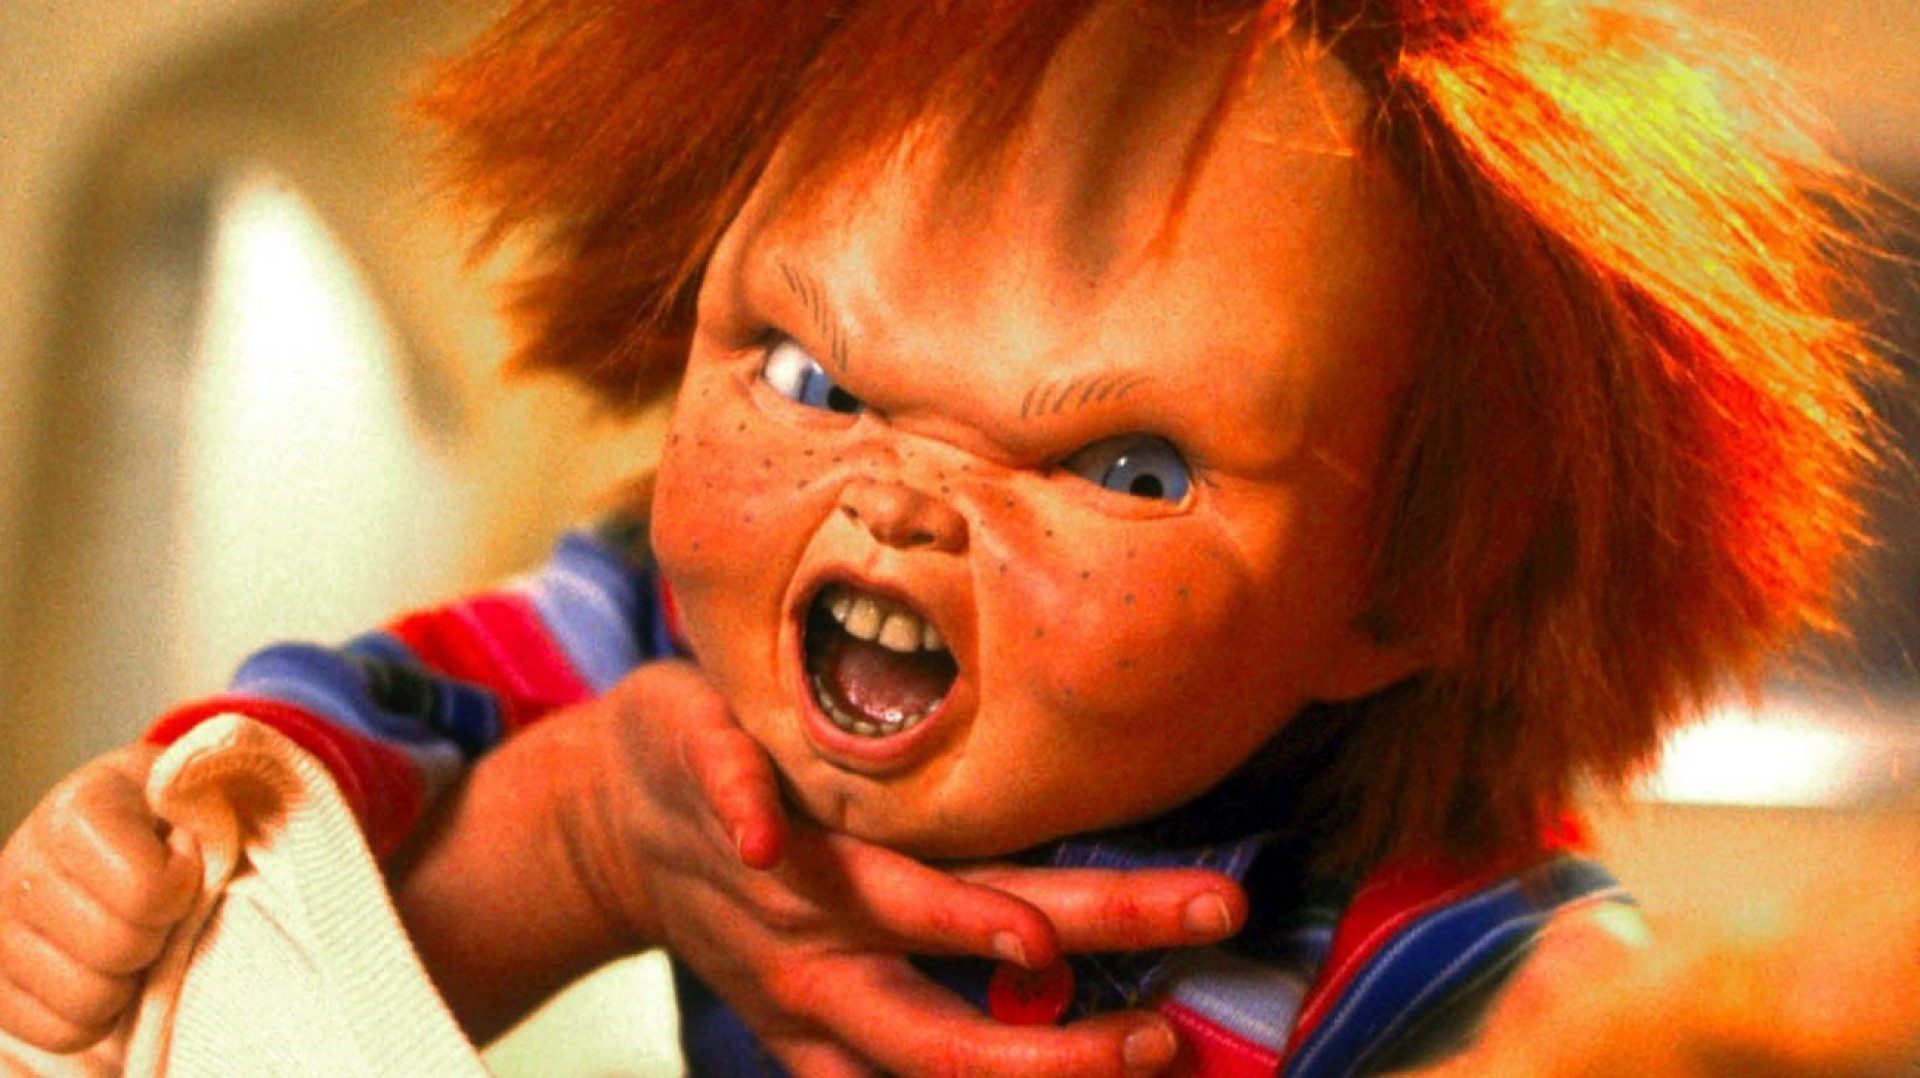 31 Days of Fright: Child’s Play